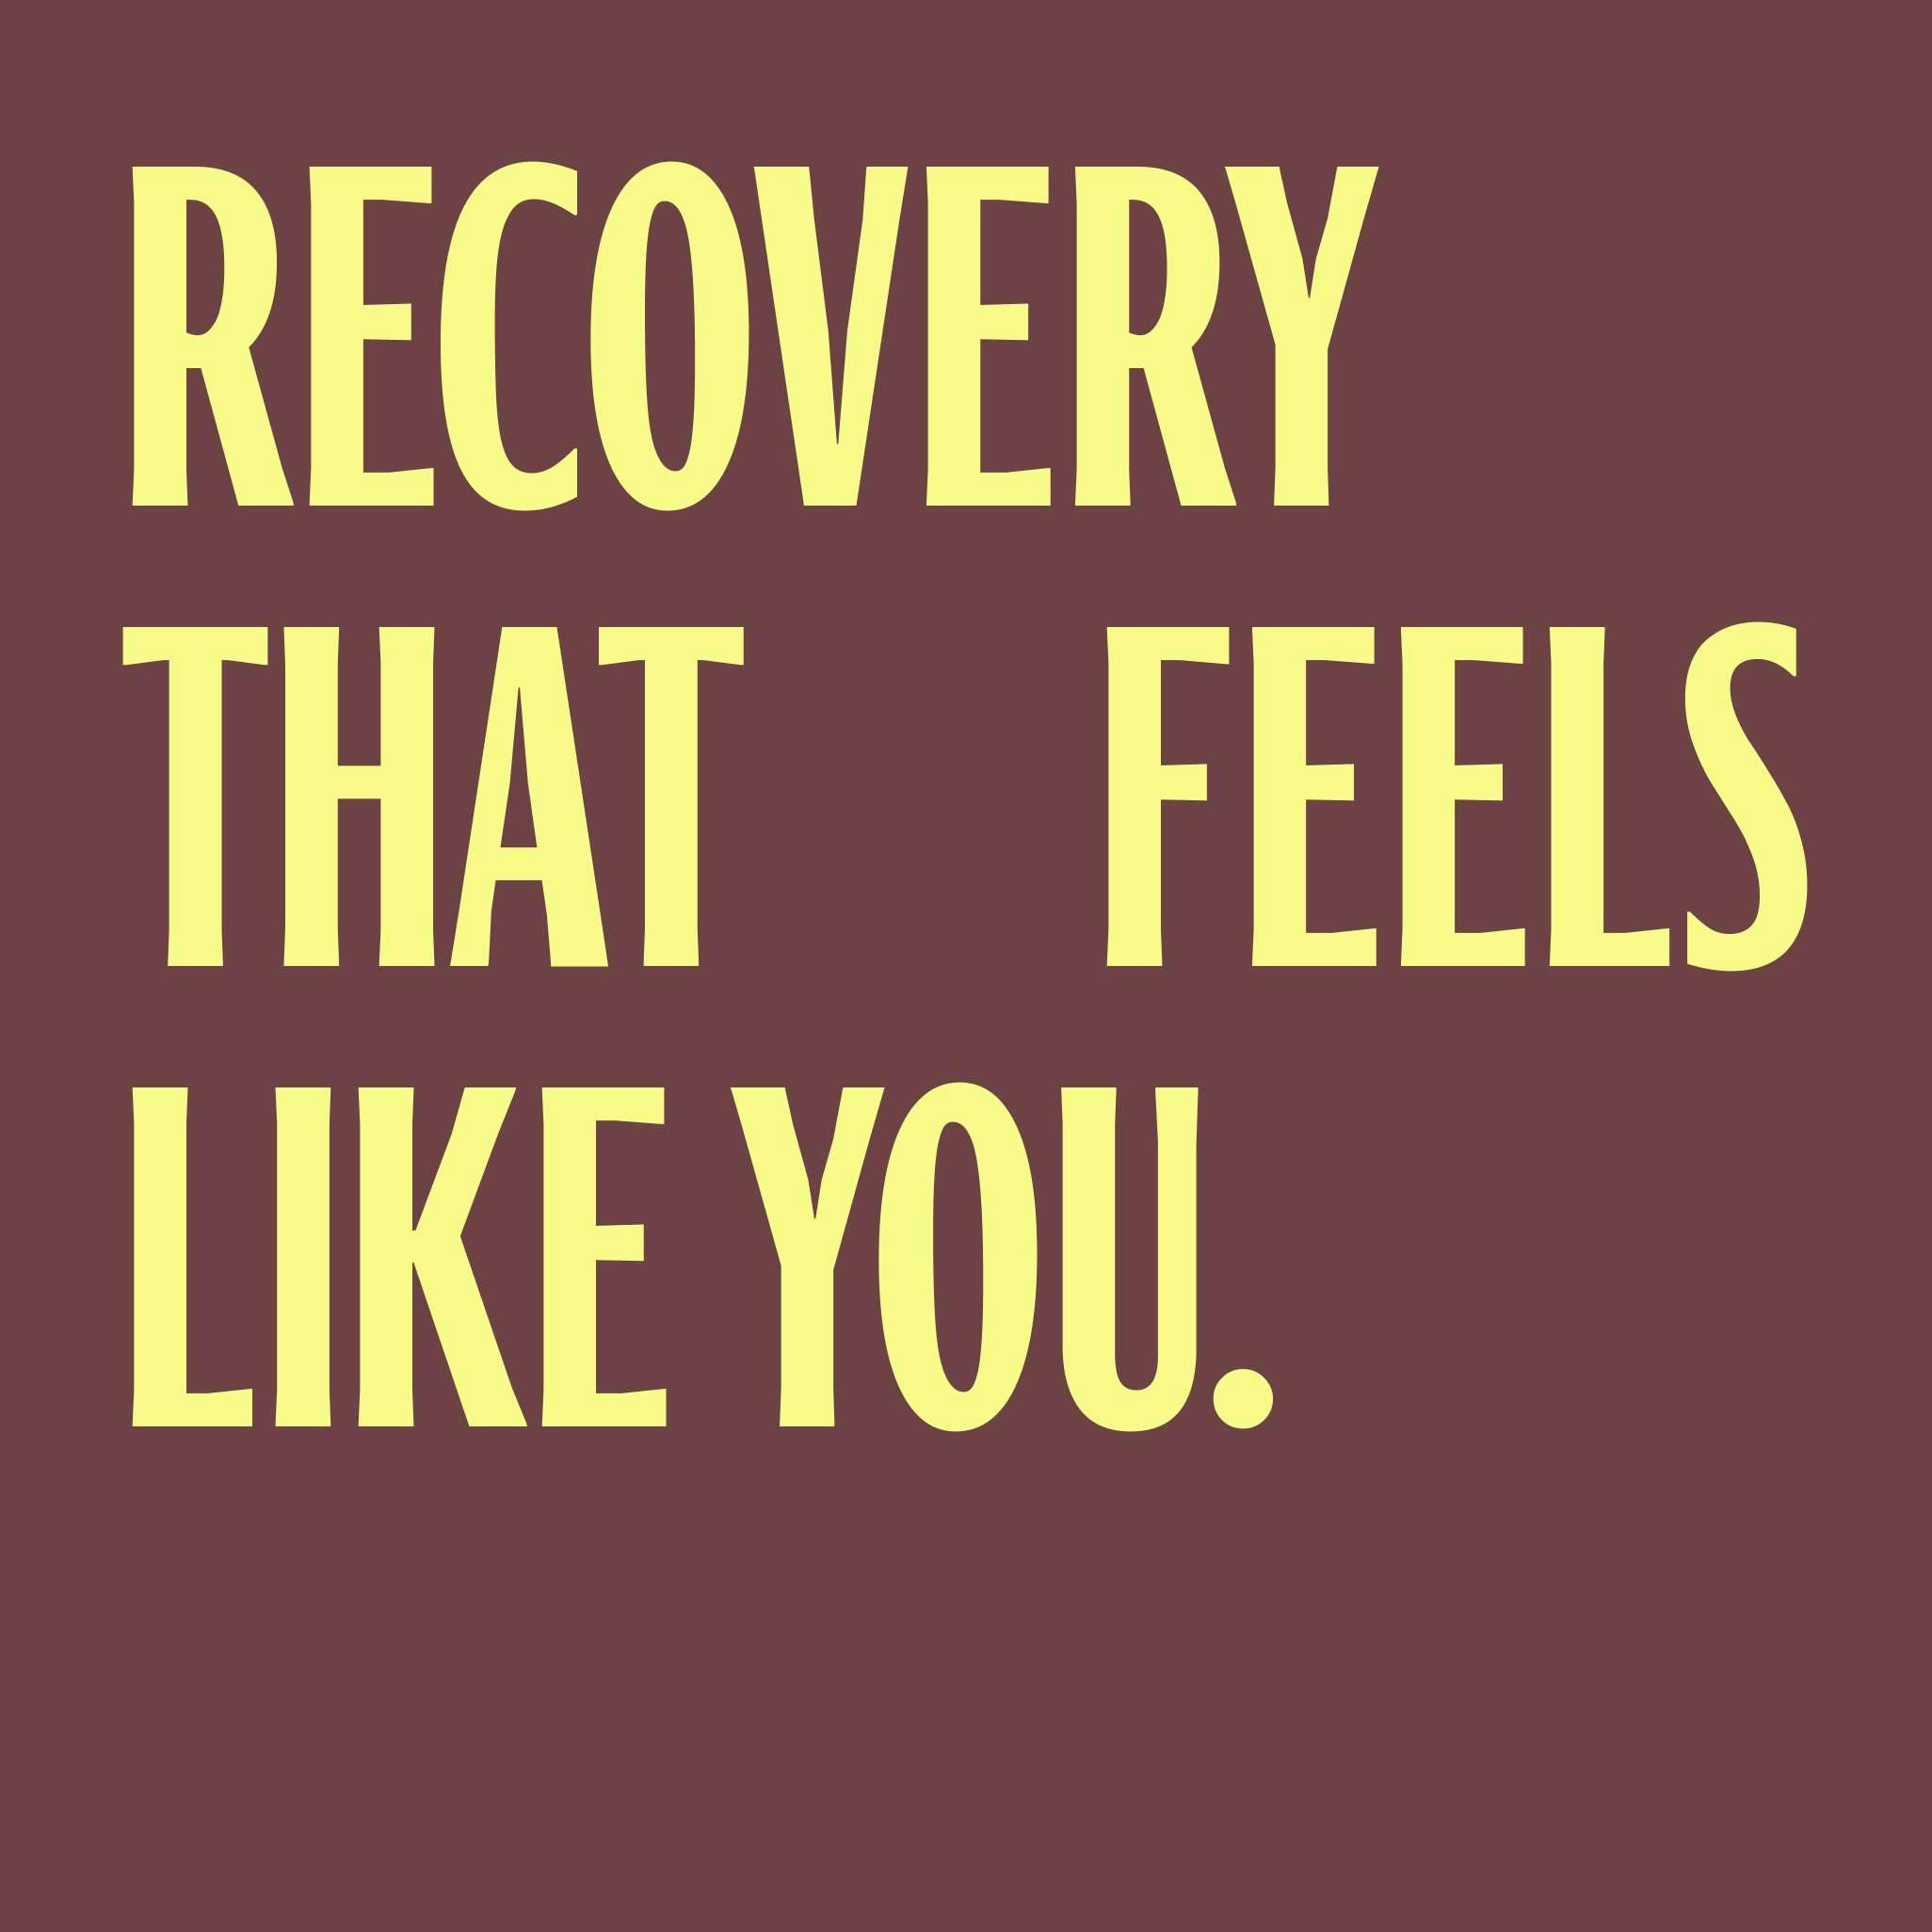 Recovery that feels like you